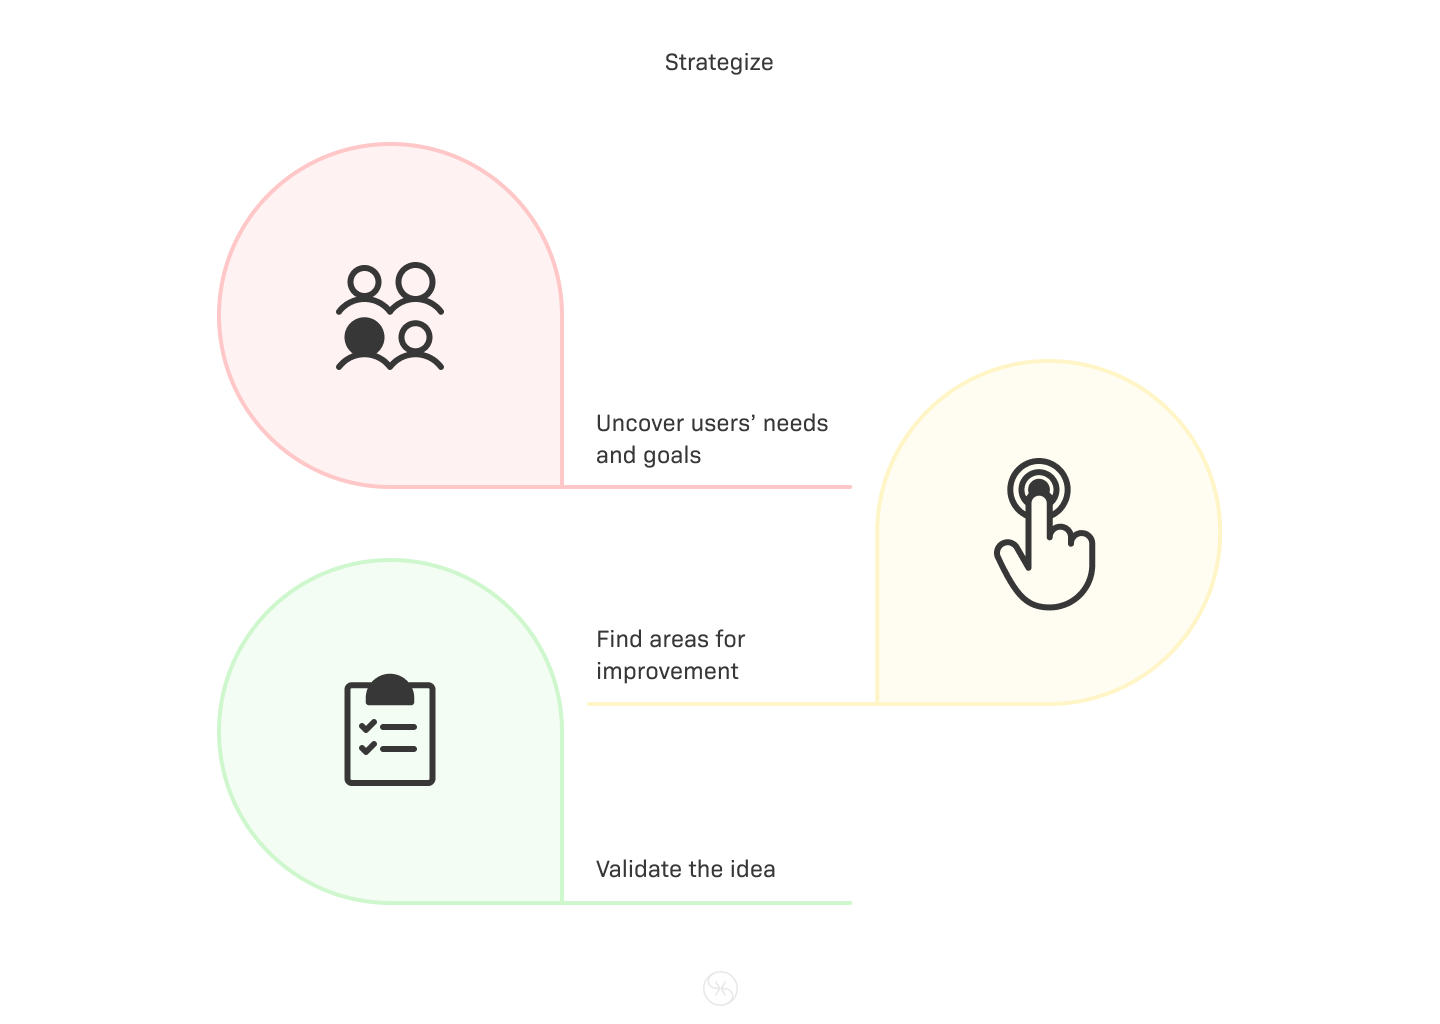 Illustration of UX research goals and methods in a strategic phase of the product development cycle. 